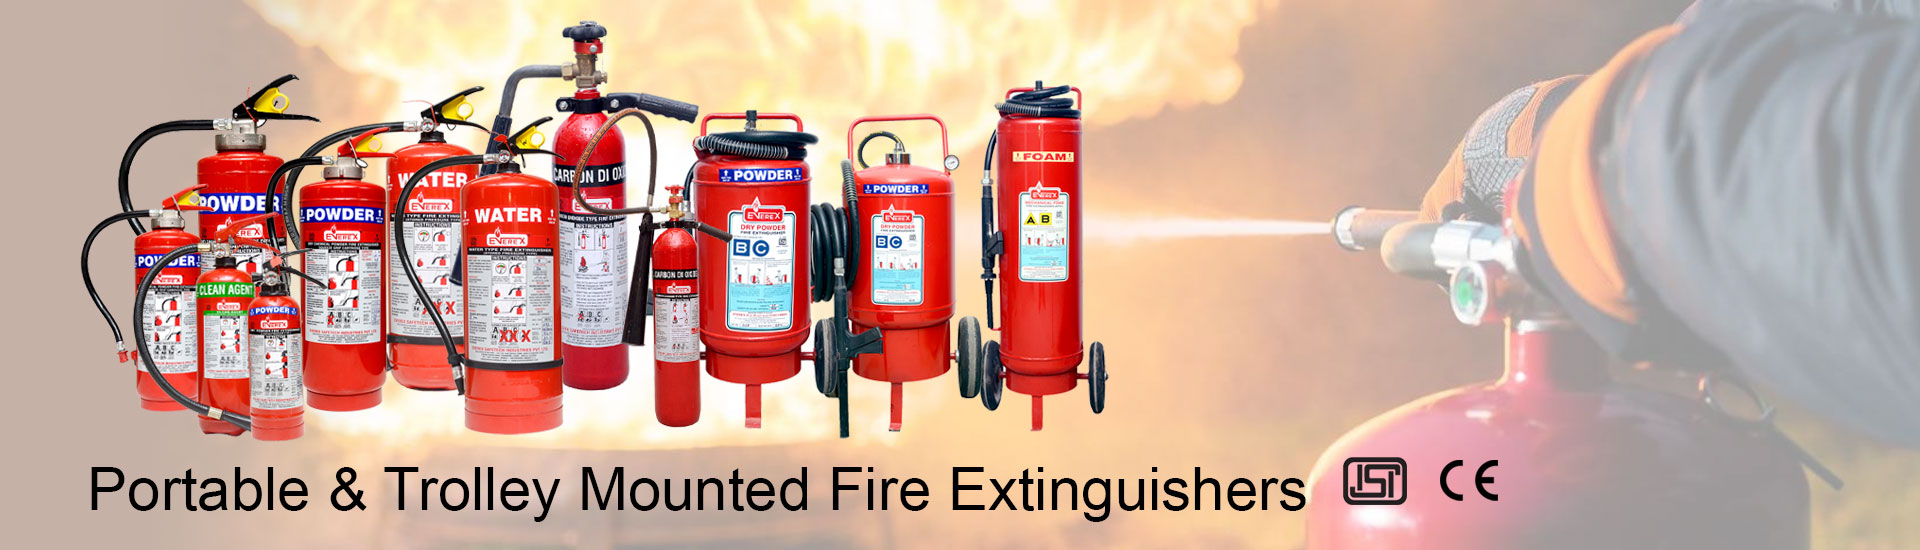 Portable fire extinguishers